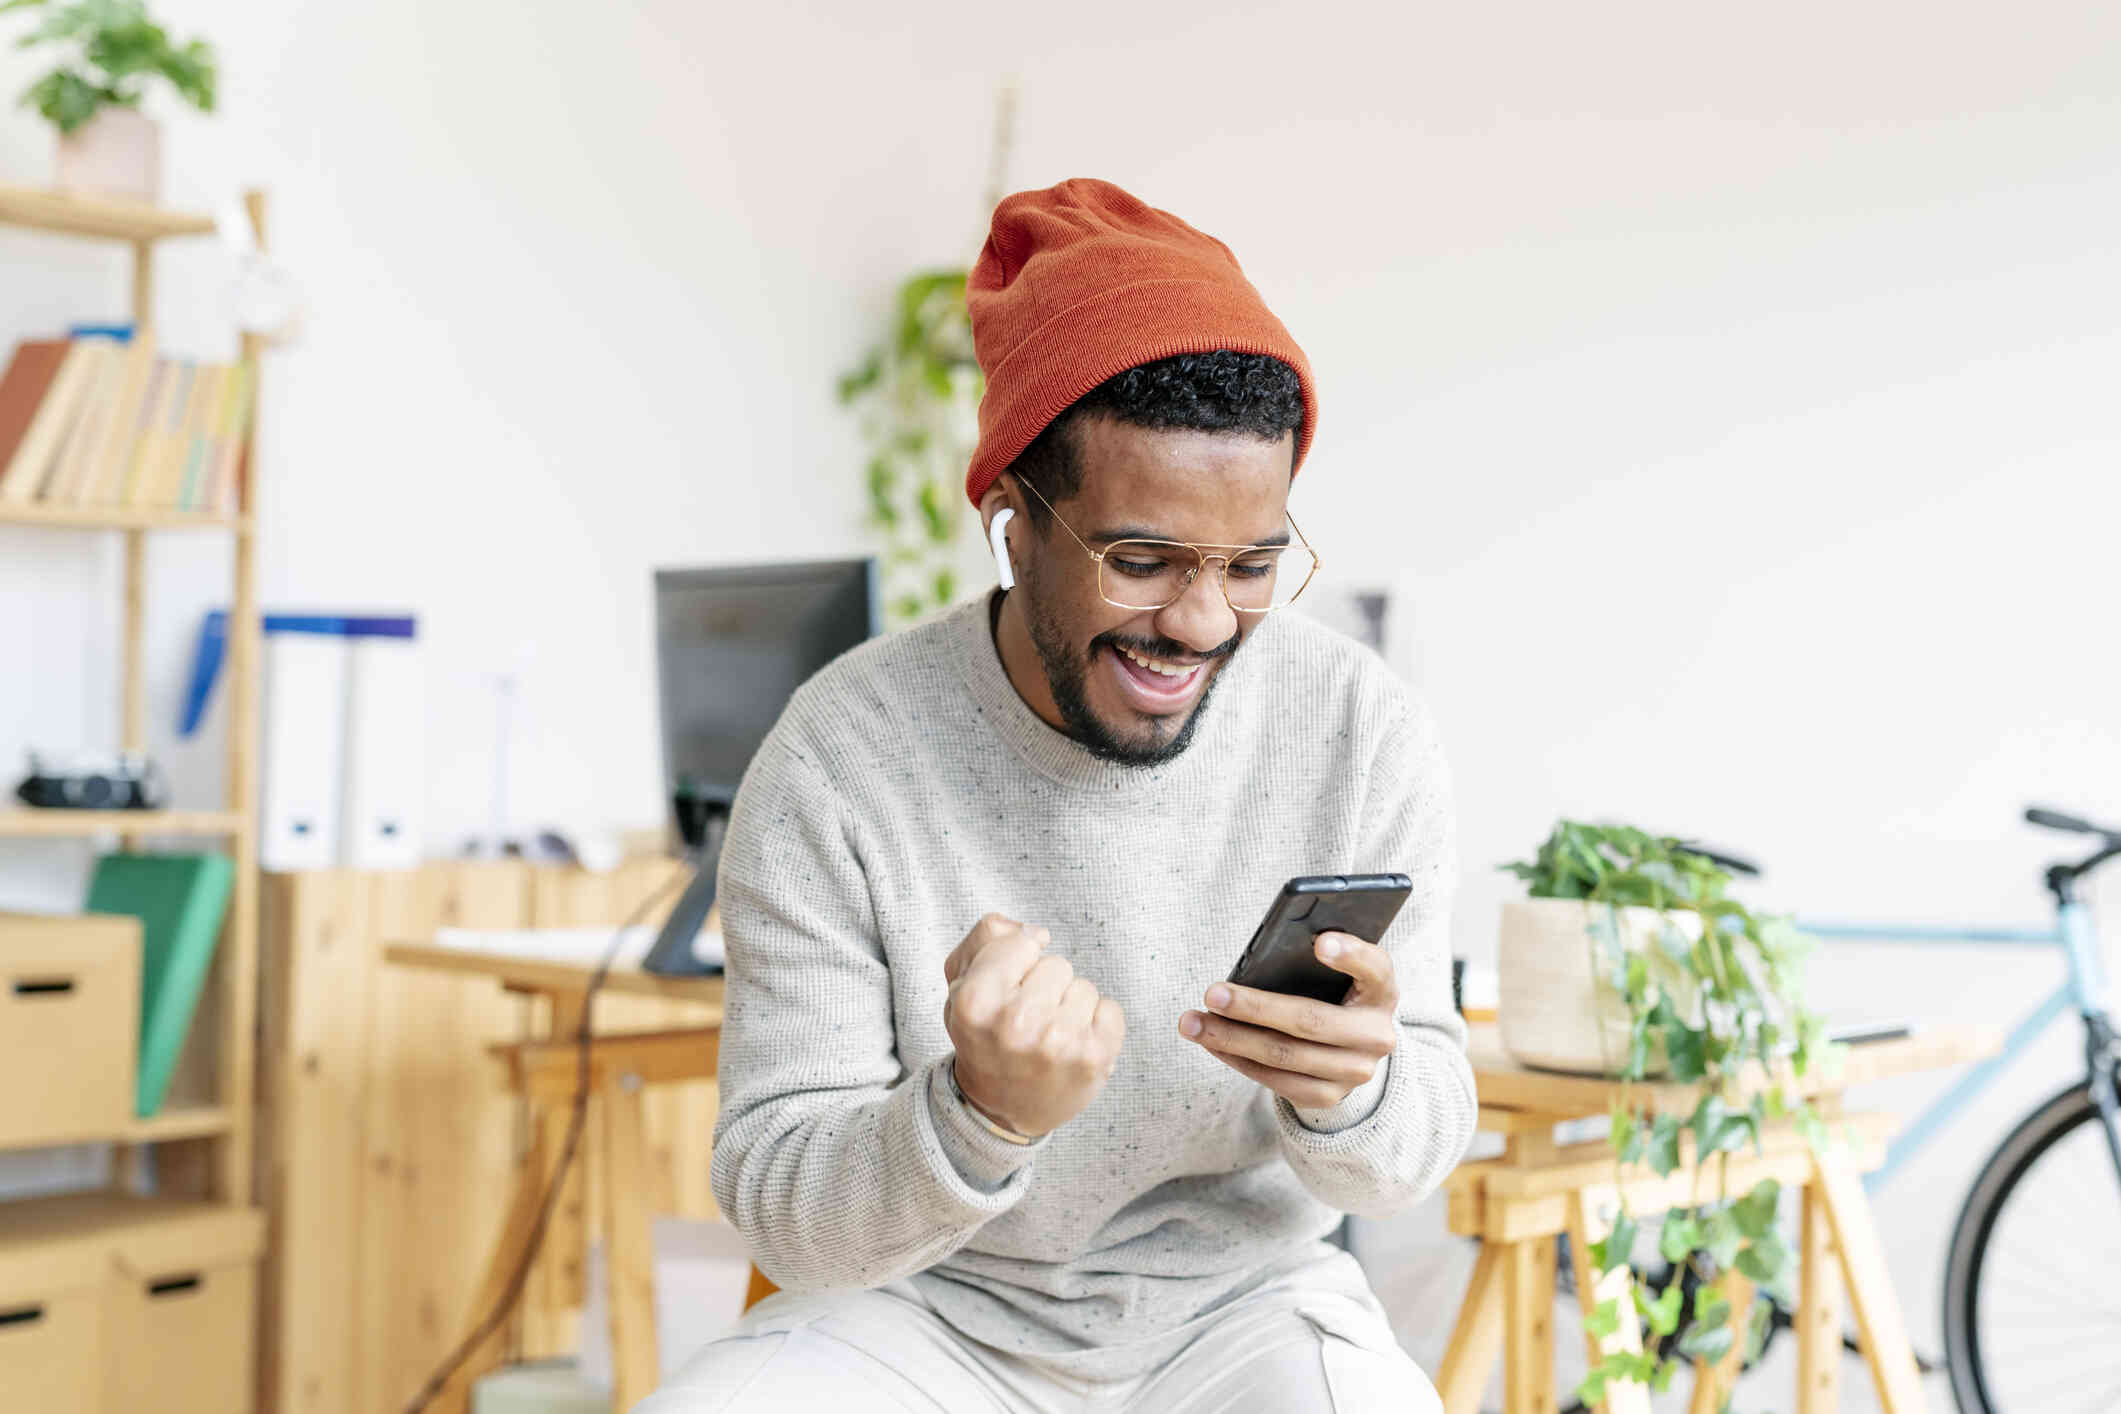 A man in an orange beanie smiles brightly while sitting in his home and looking at the cellphone in his hand.